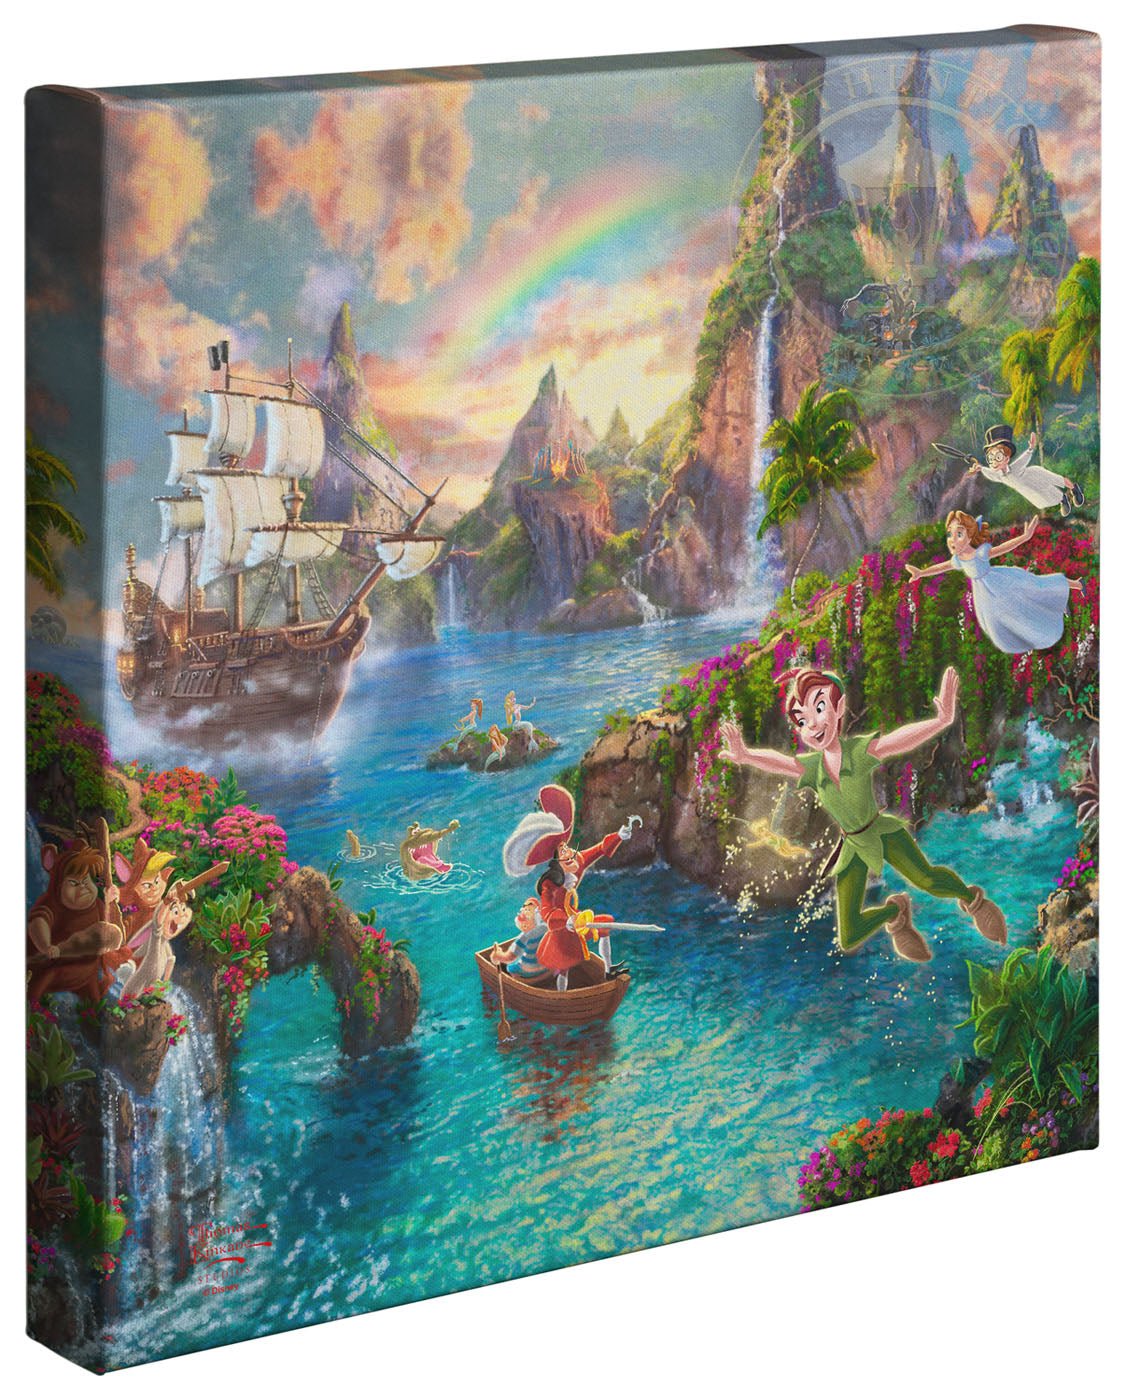 Thomas Kinkade Studios "Disney Peter Pan's Neverland" Limited and Open Canvas Giclee